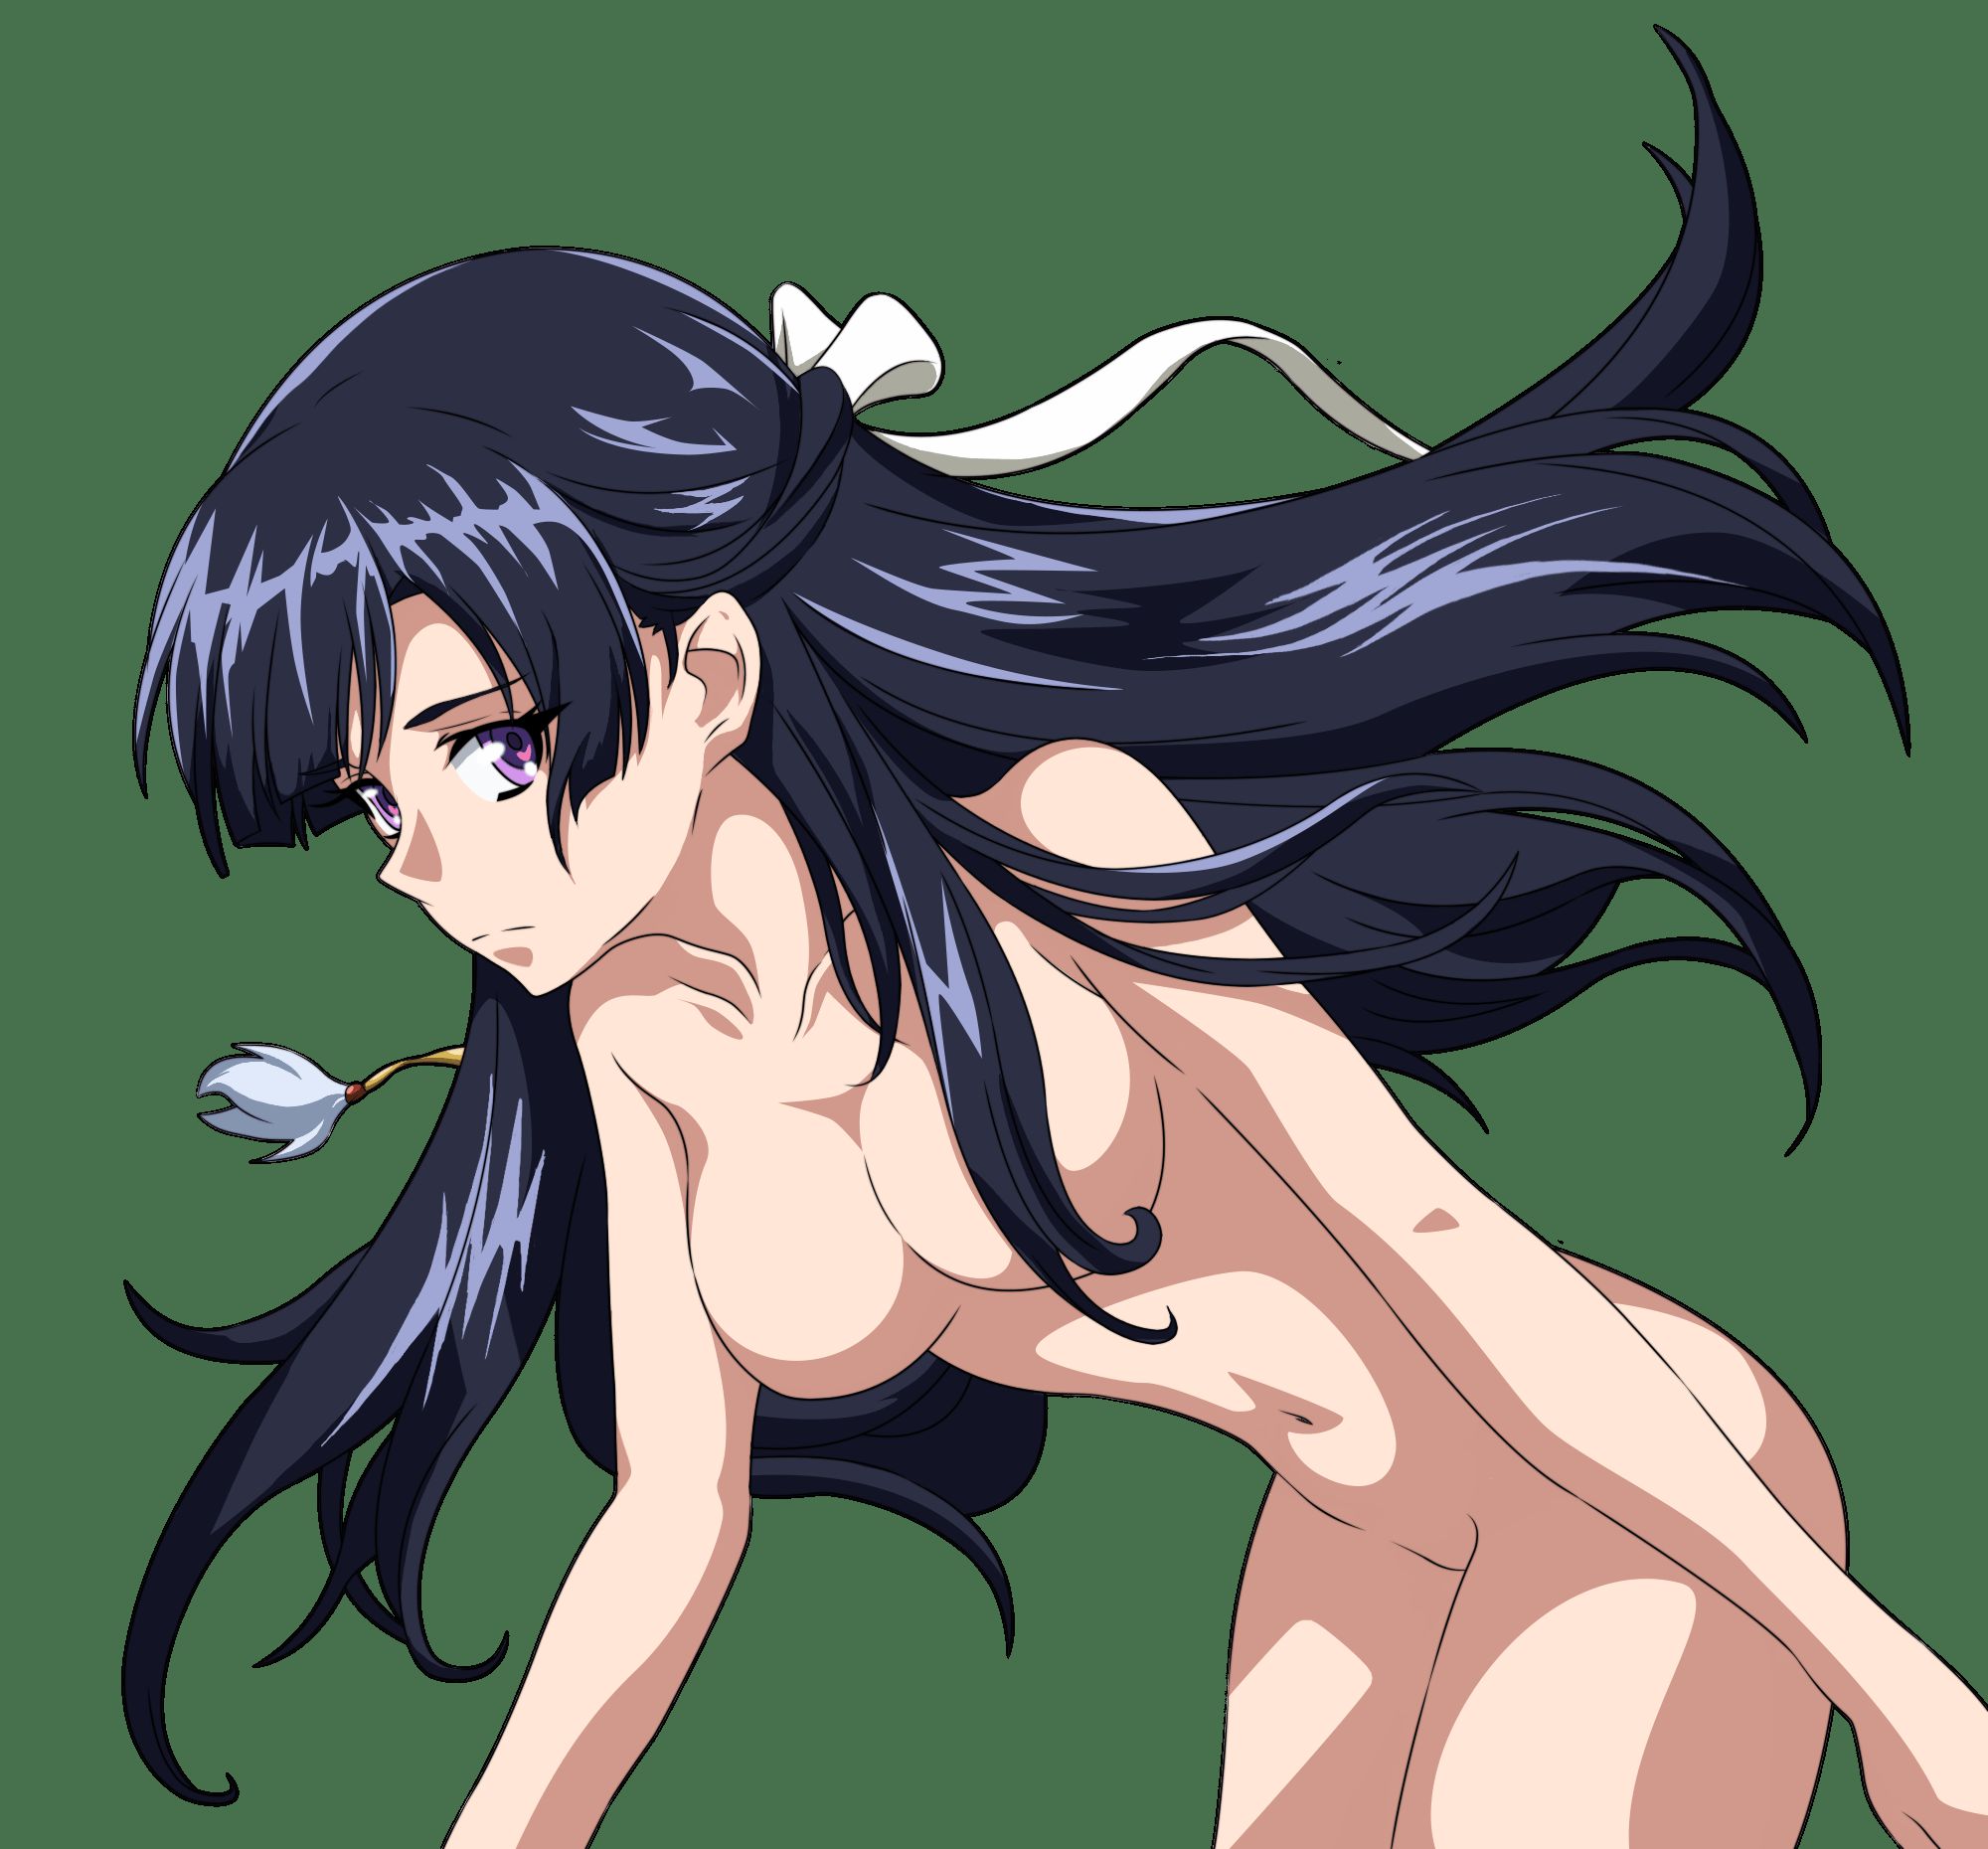 [Anime character material] png erotic images of animated characters part 42 9